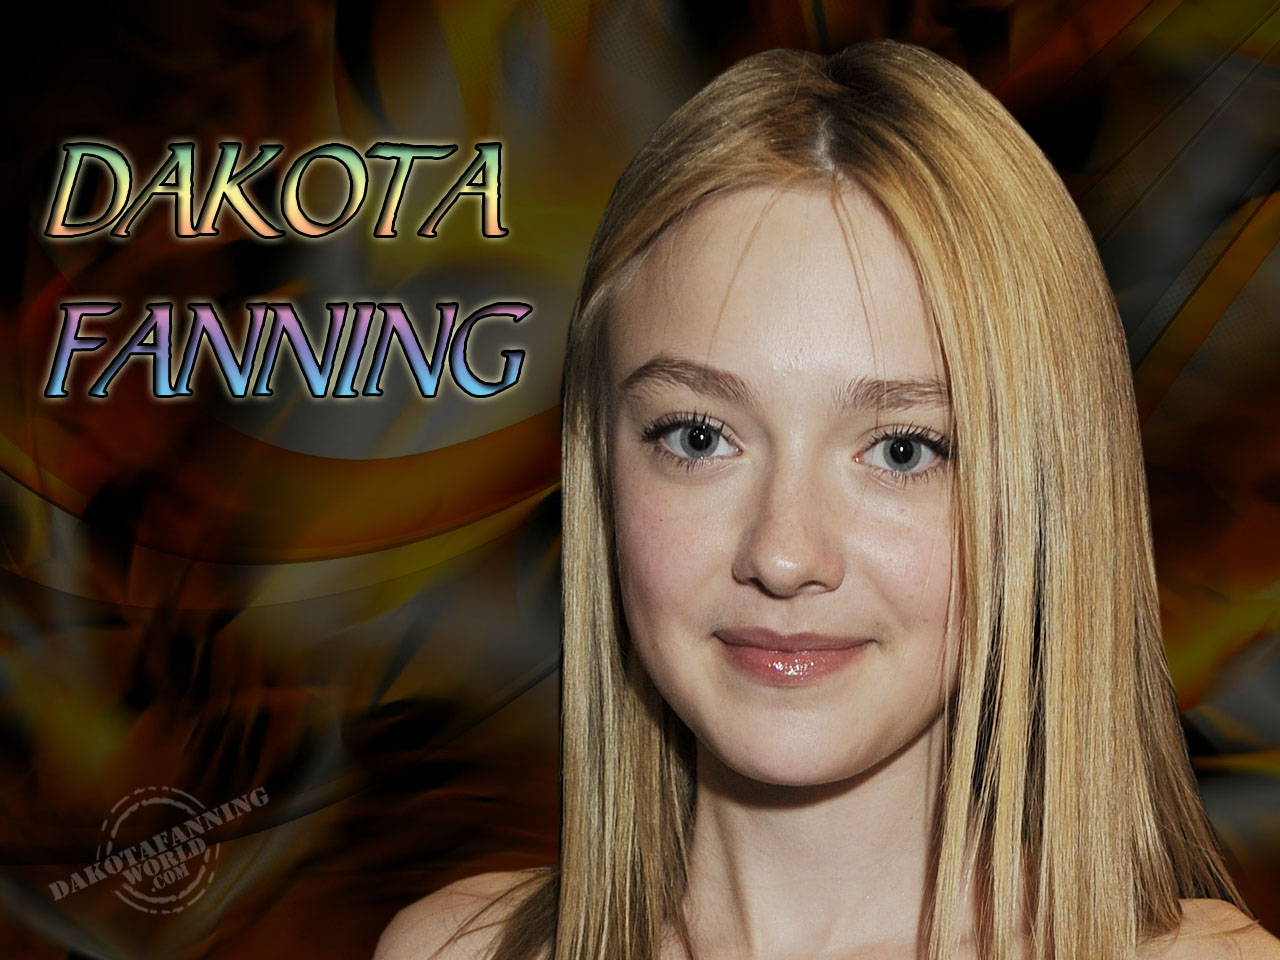 Dakota Fanning Hd Wallpapers 2012 | All About Real Hd Wallpapers